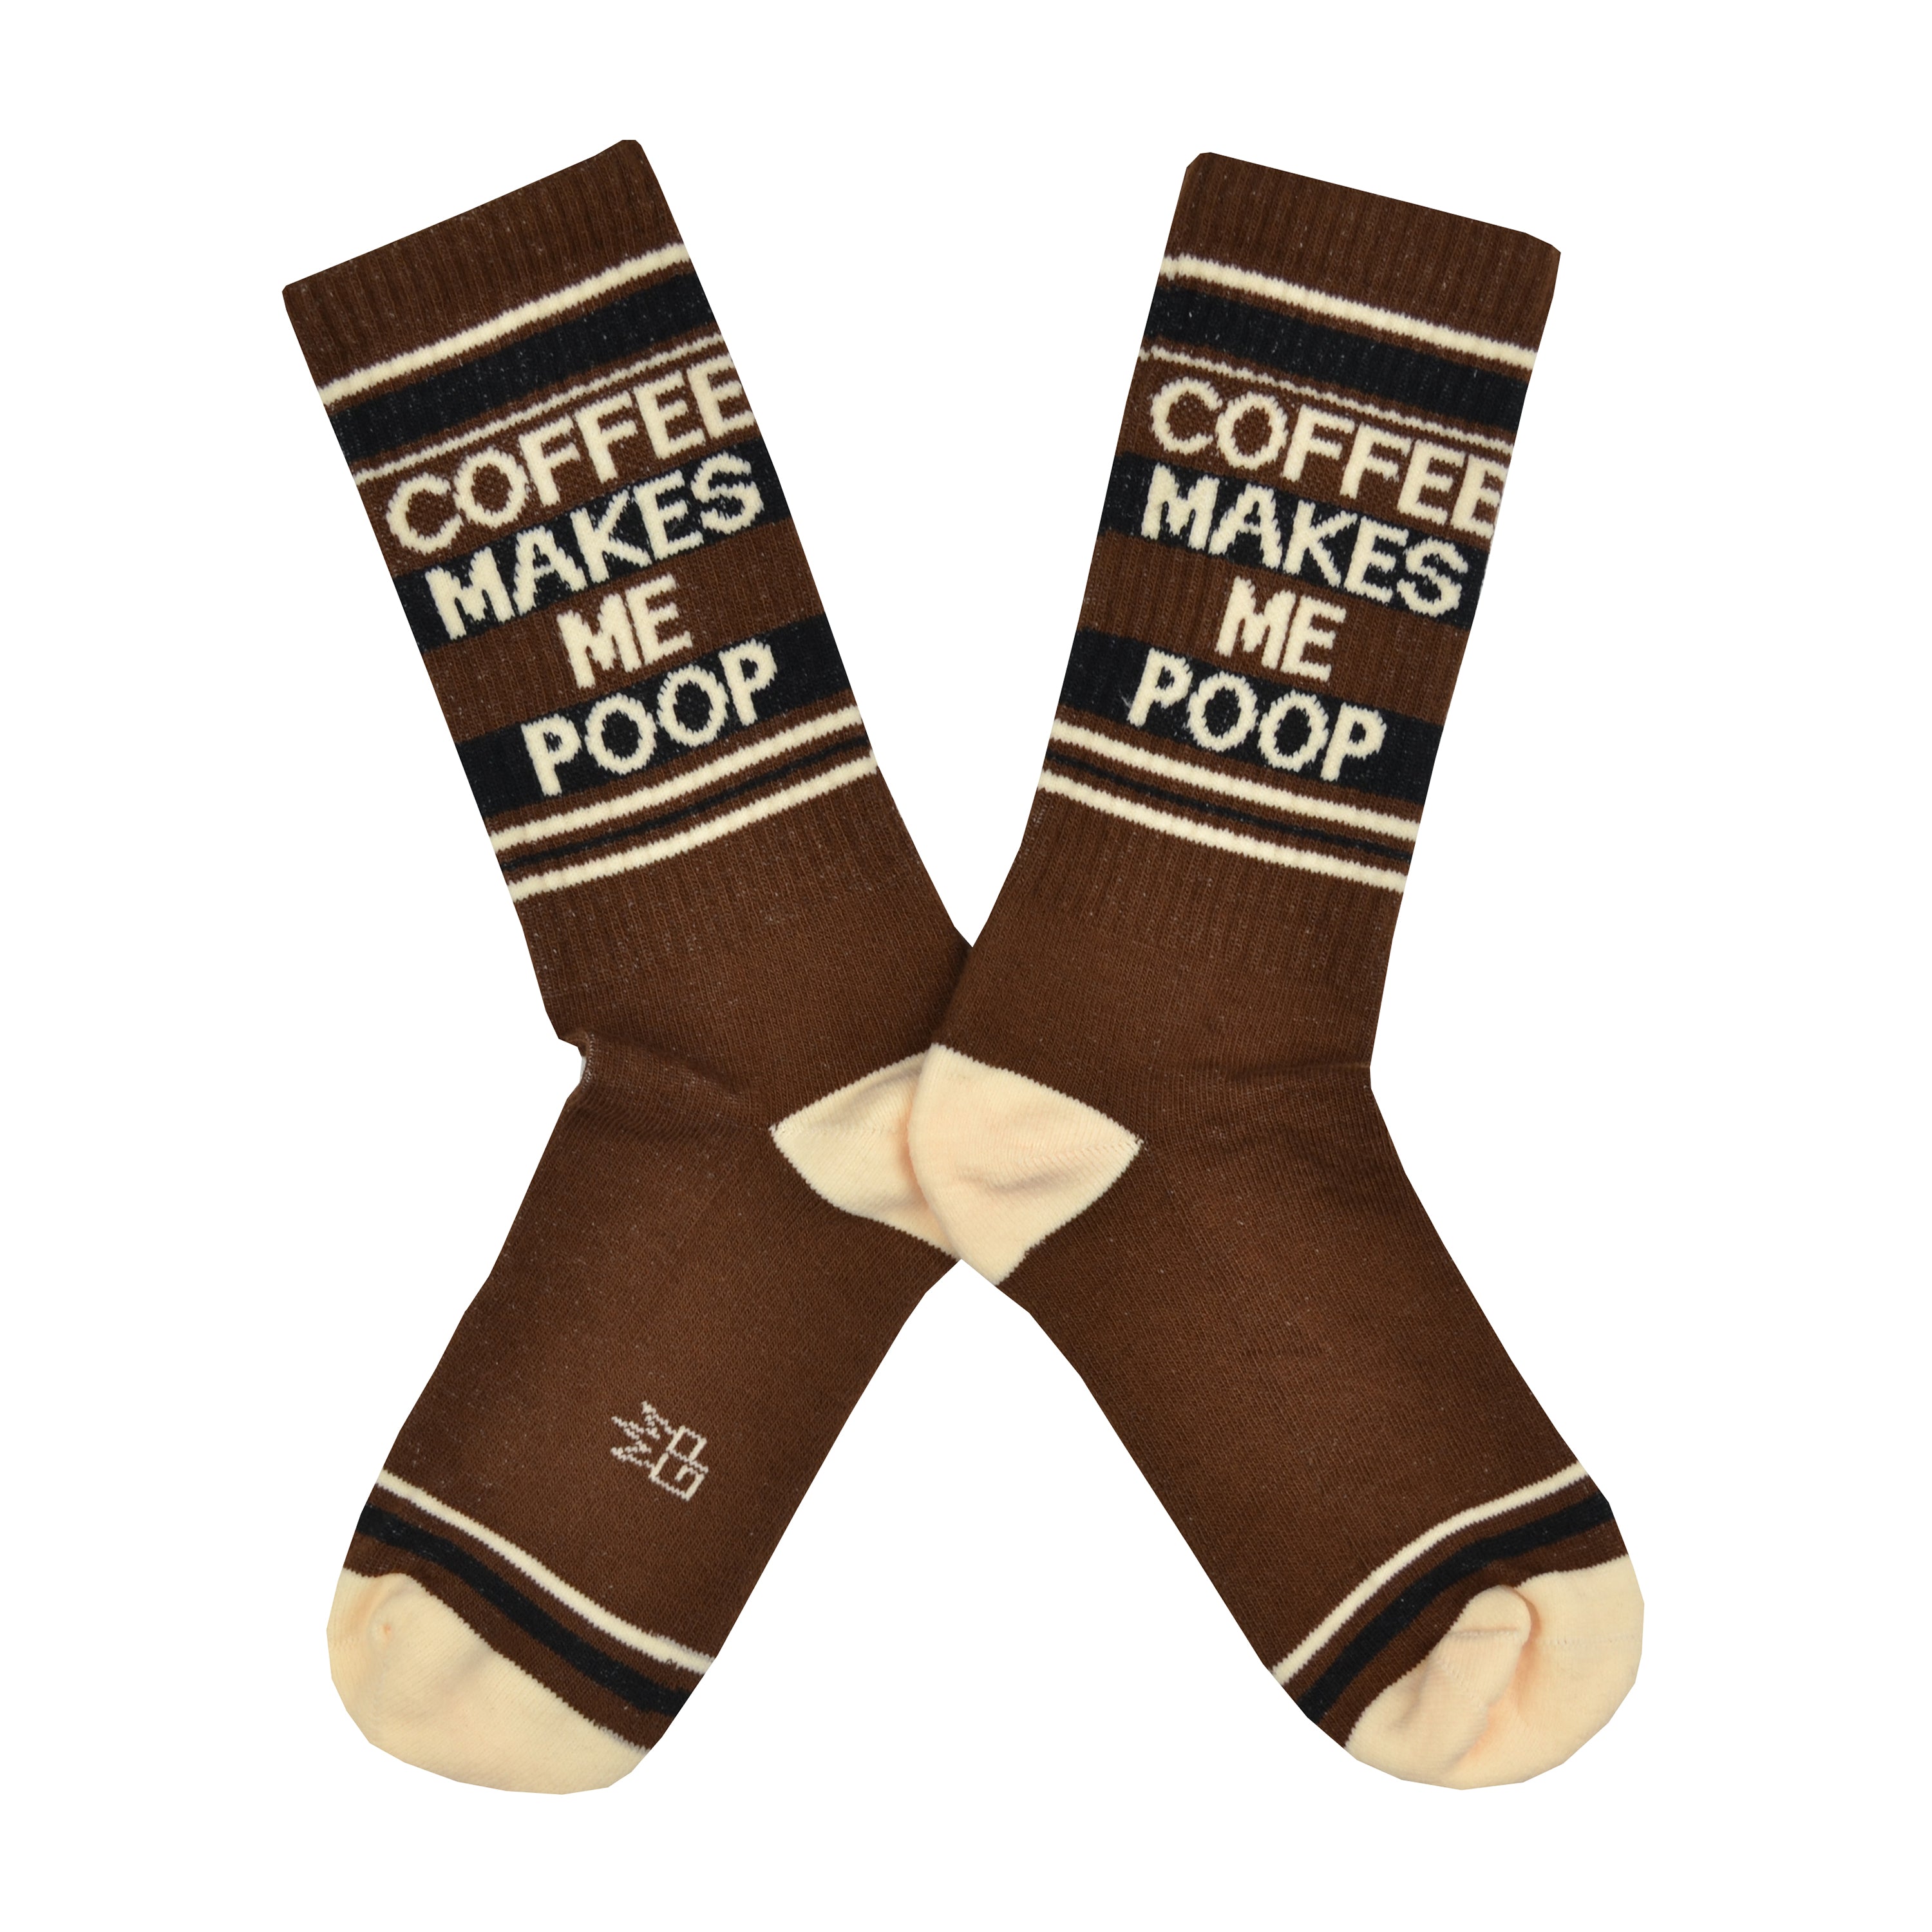 Shown in a flatlay, a pair of Gumball Poodle, dark brown cotton crew socks with tan heel/toe/accent stripes and “Coffee Makes Me Poop” text